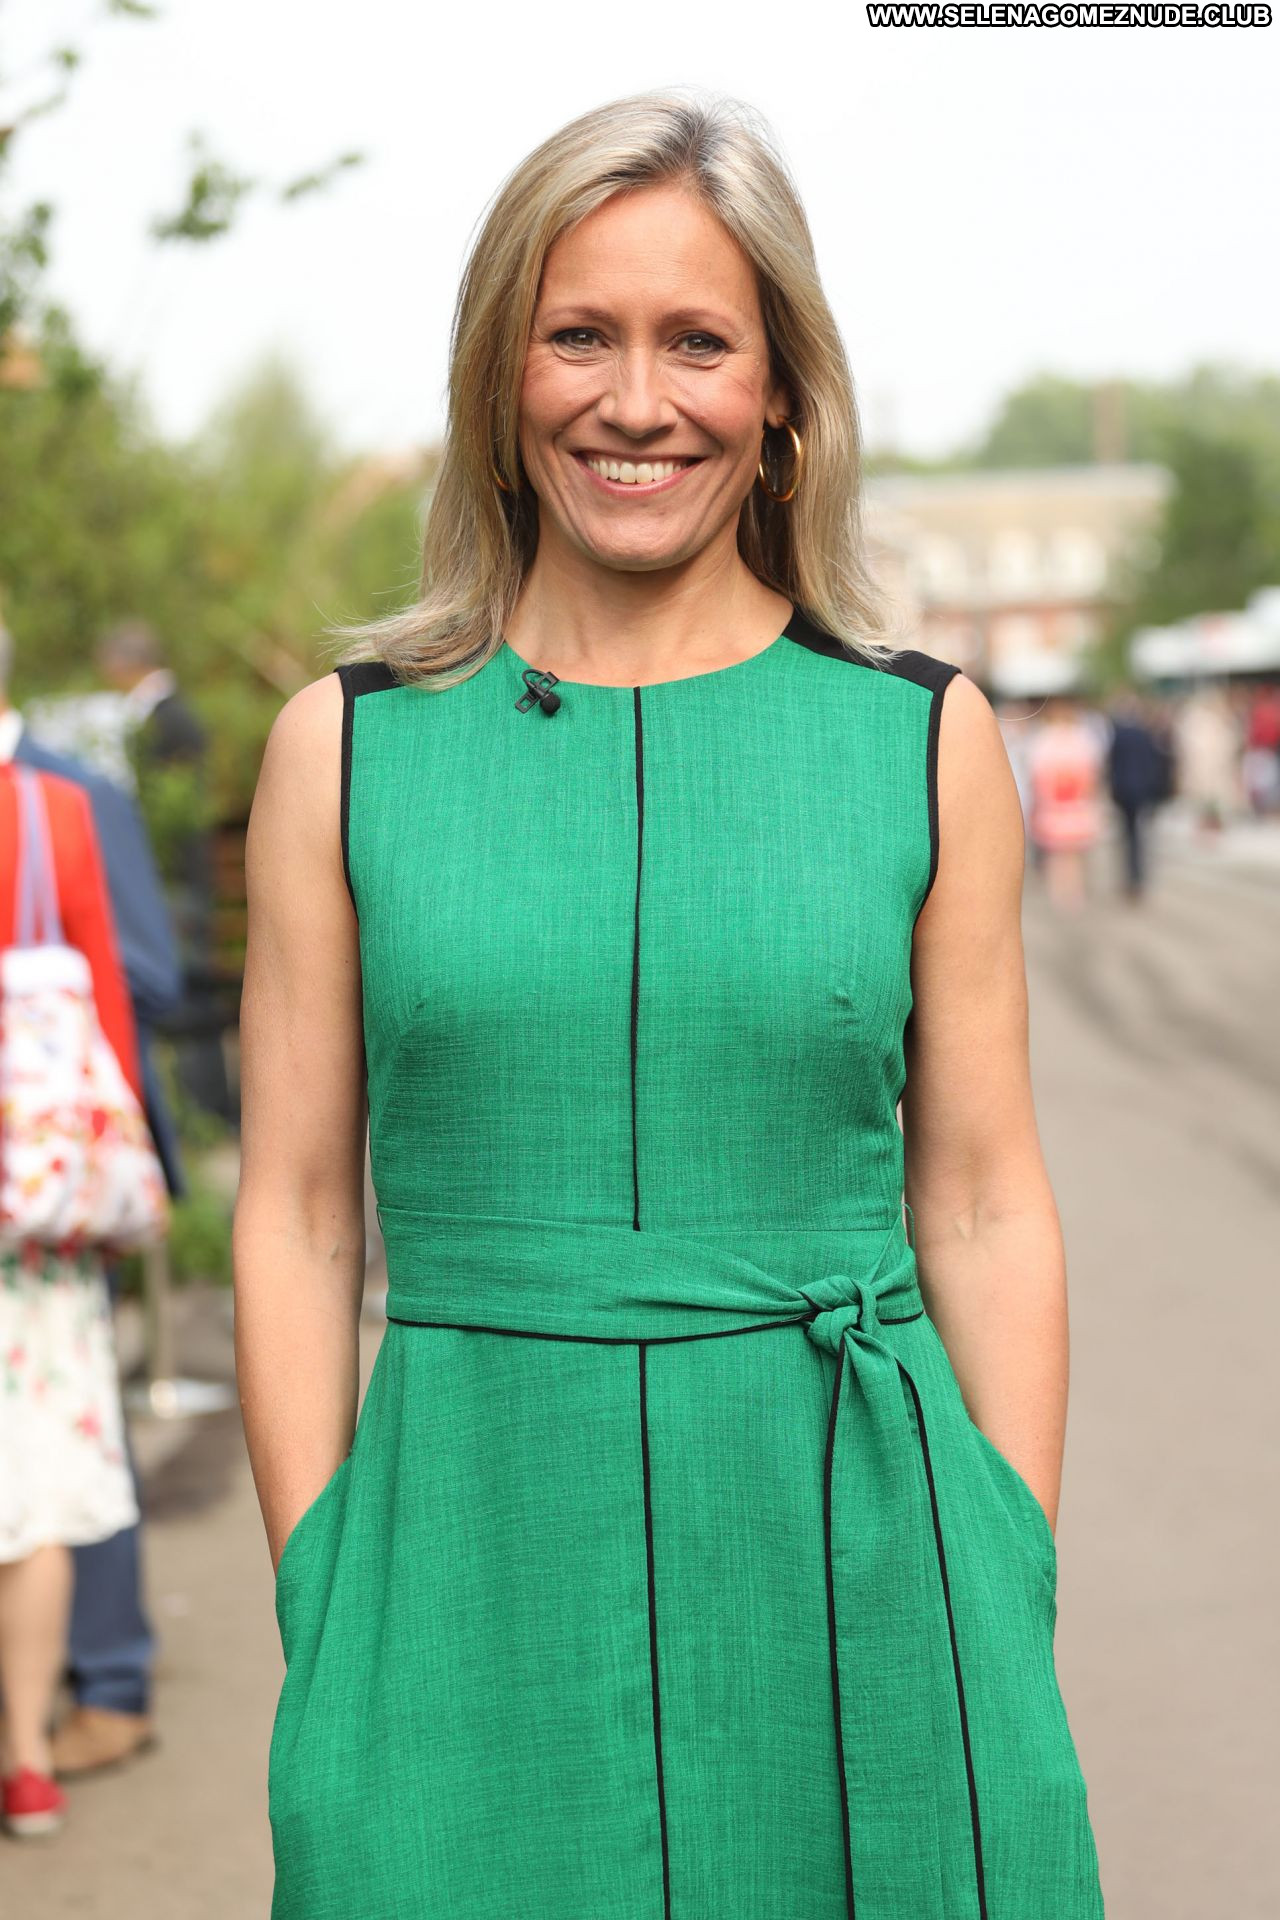 Sophie Raworth Posing Hot Beautiful Babe Sexy Celebrity